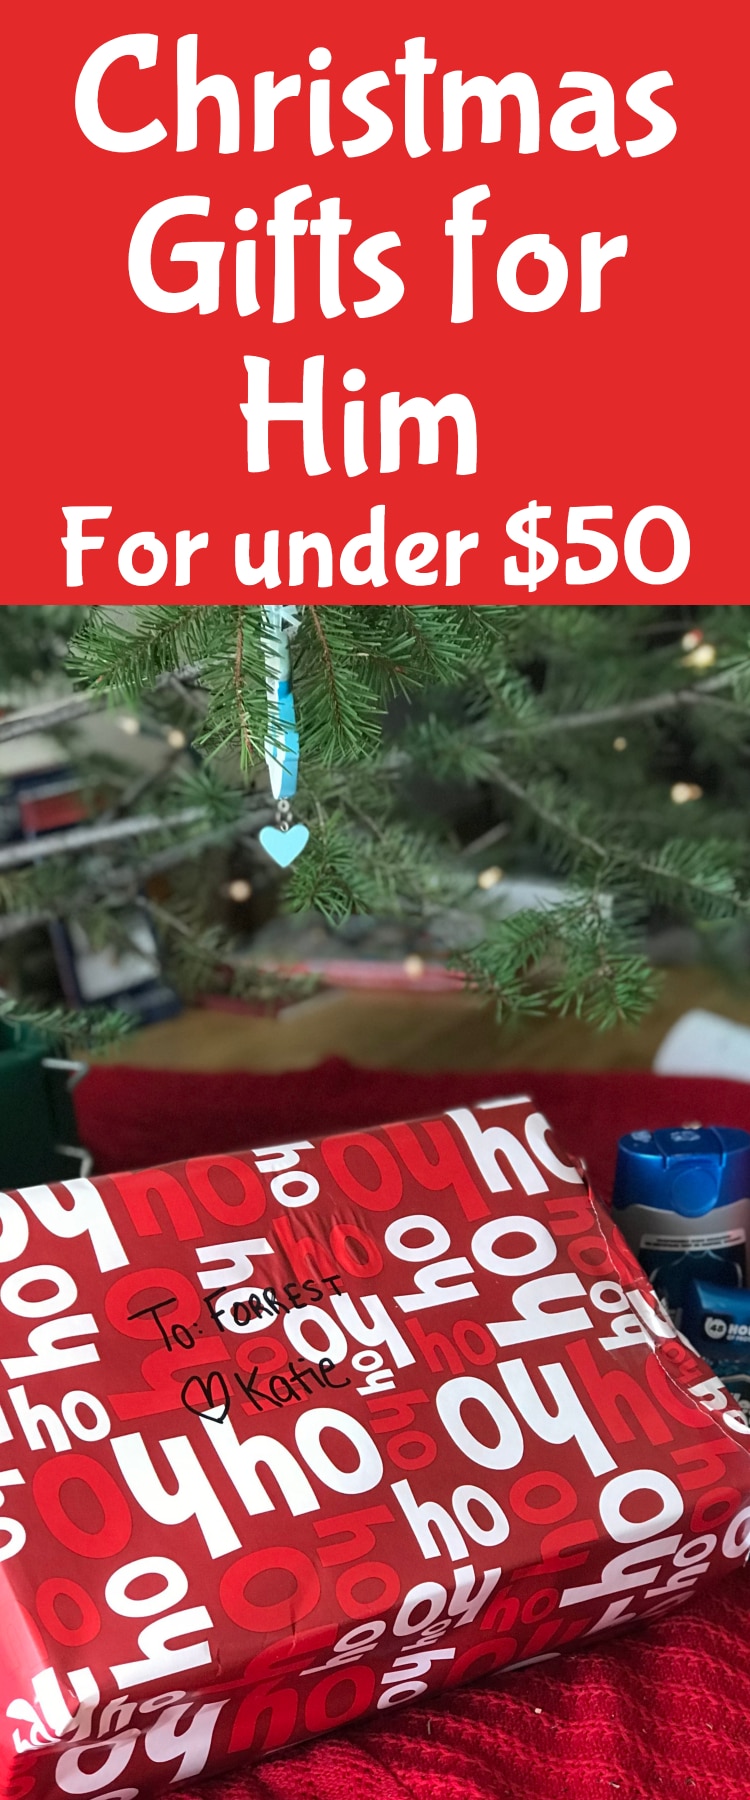 Gift Ideas for him for under $50